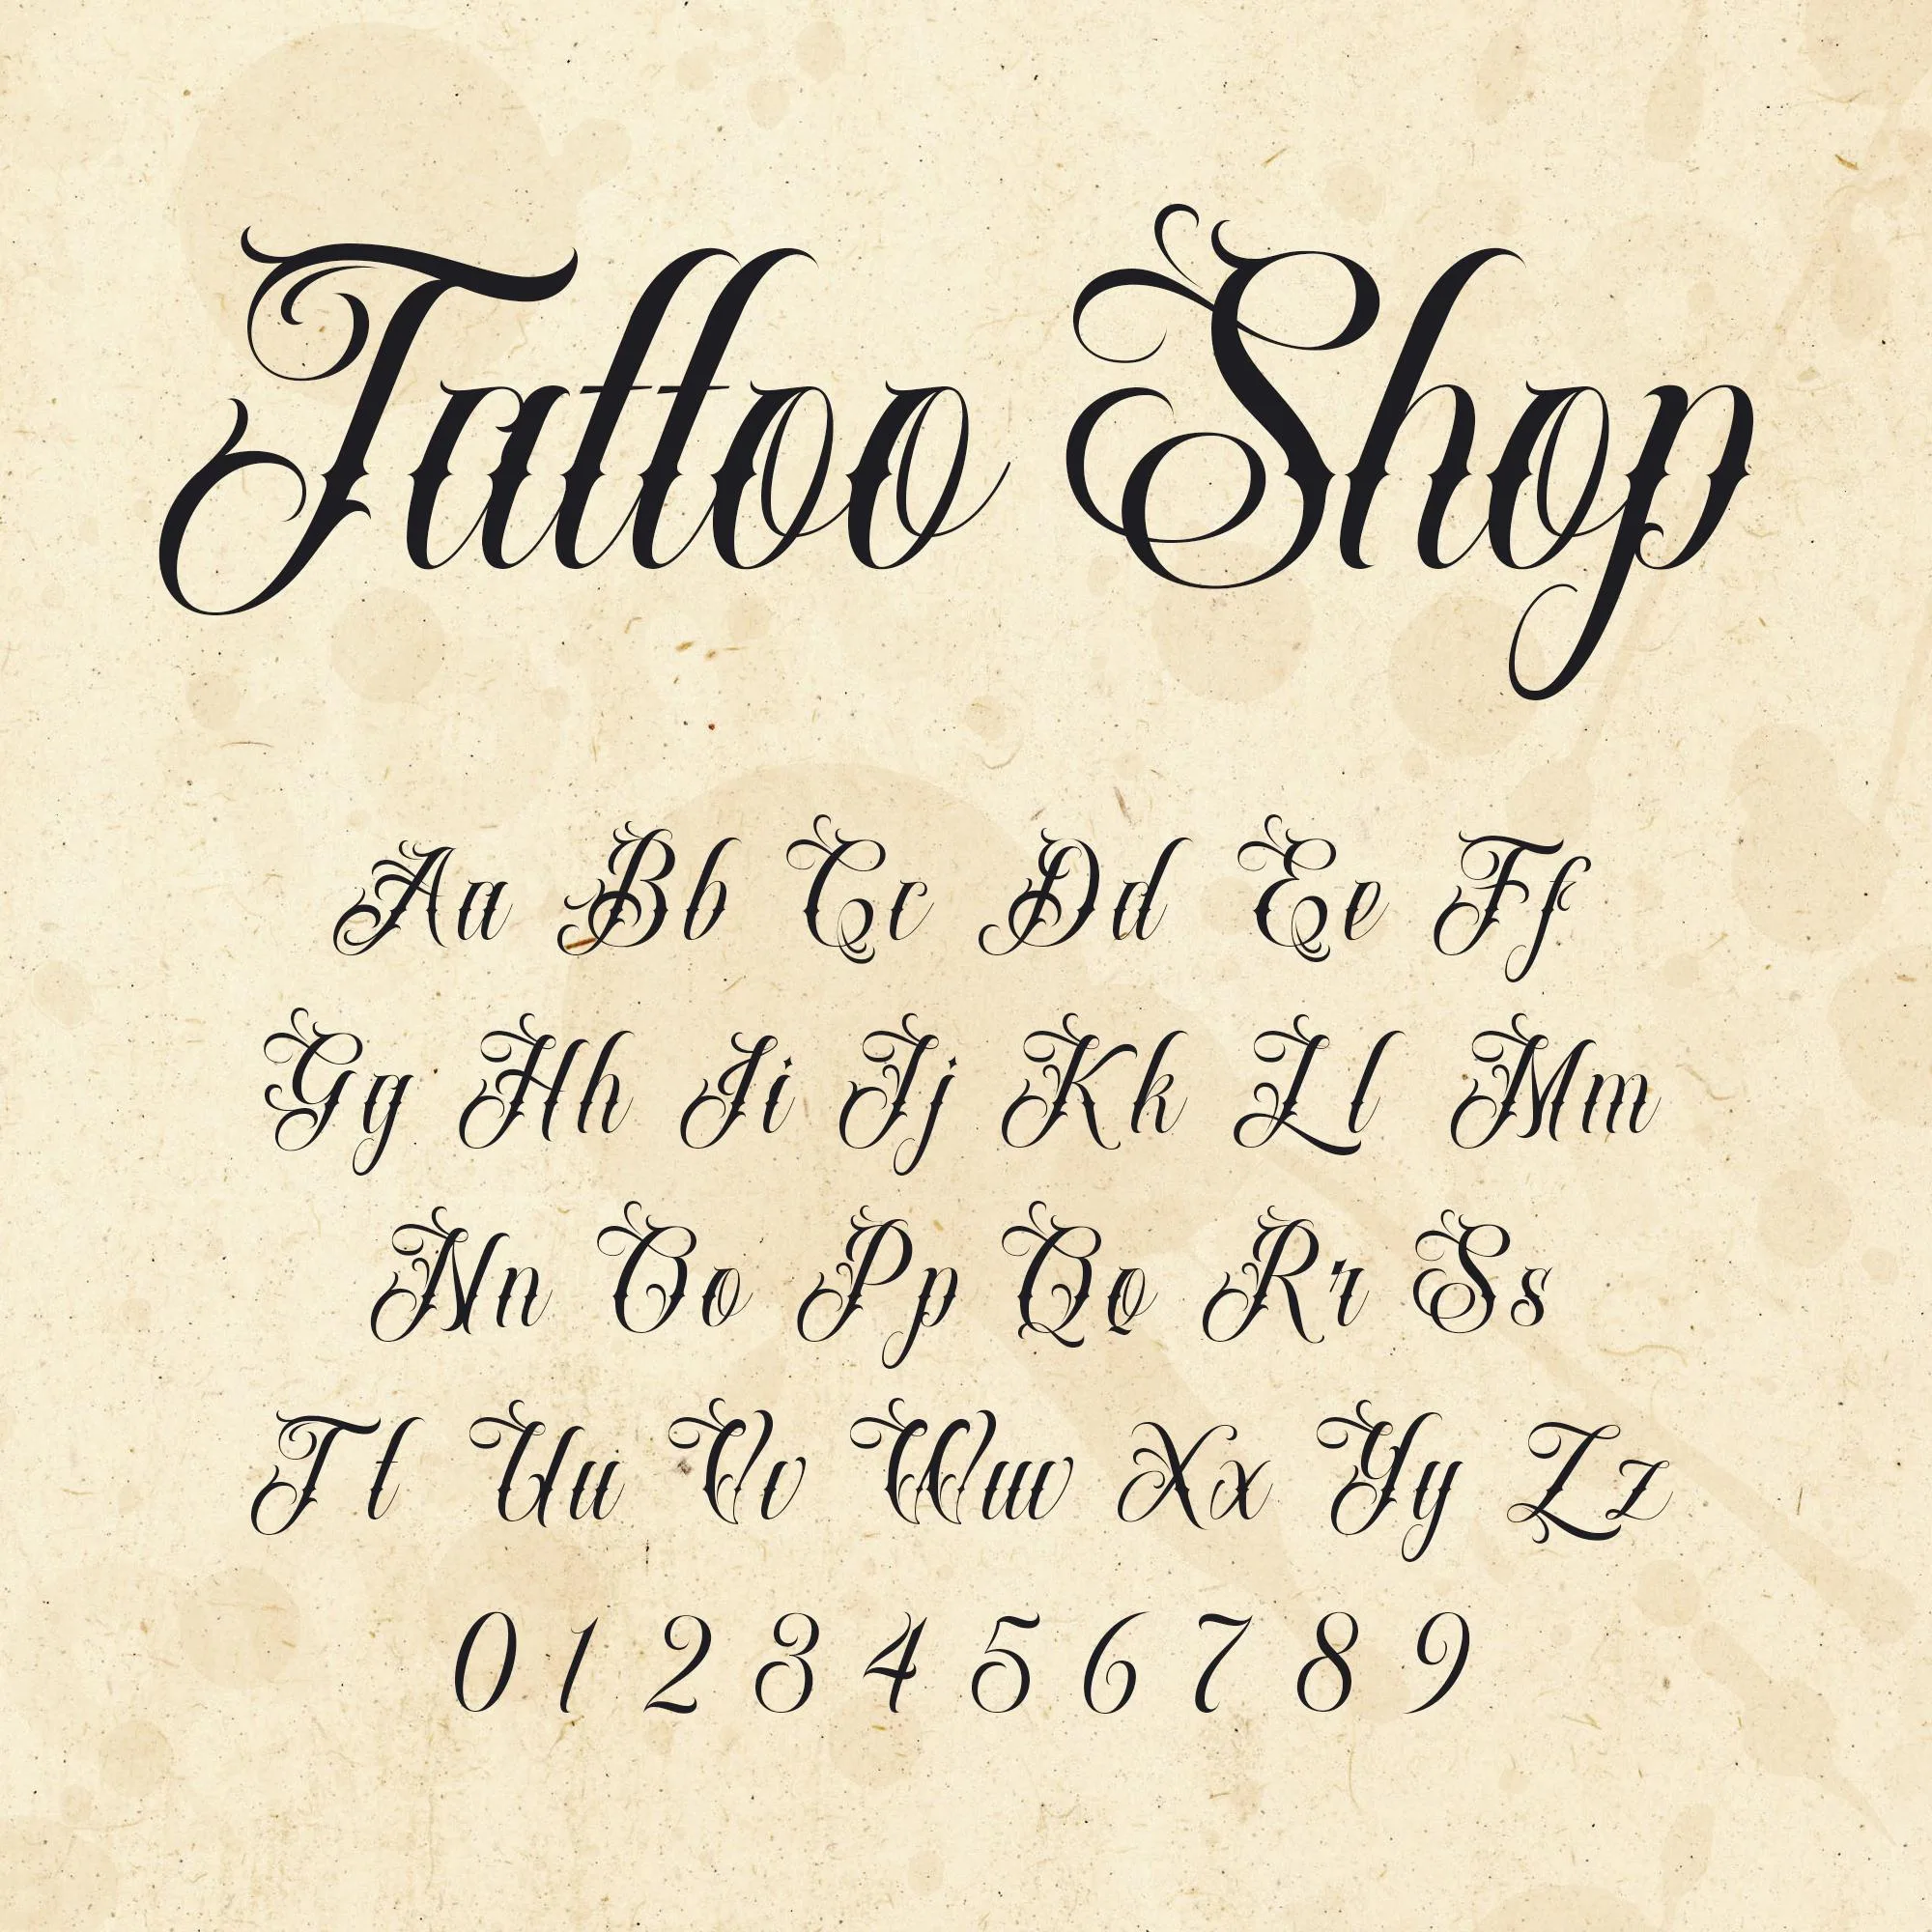 44 Tattoo Fonts To Ink Your Designs in Style | HipFonts